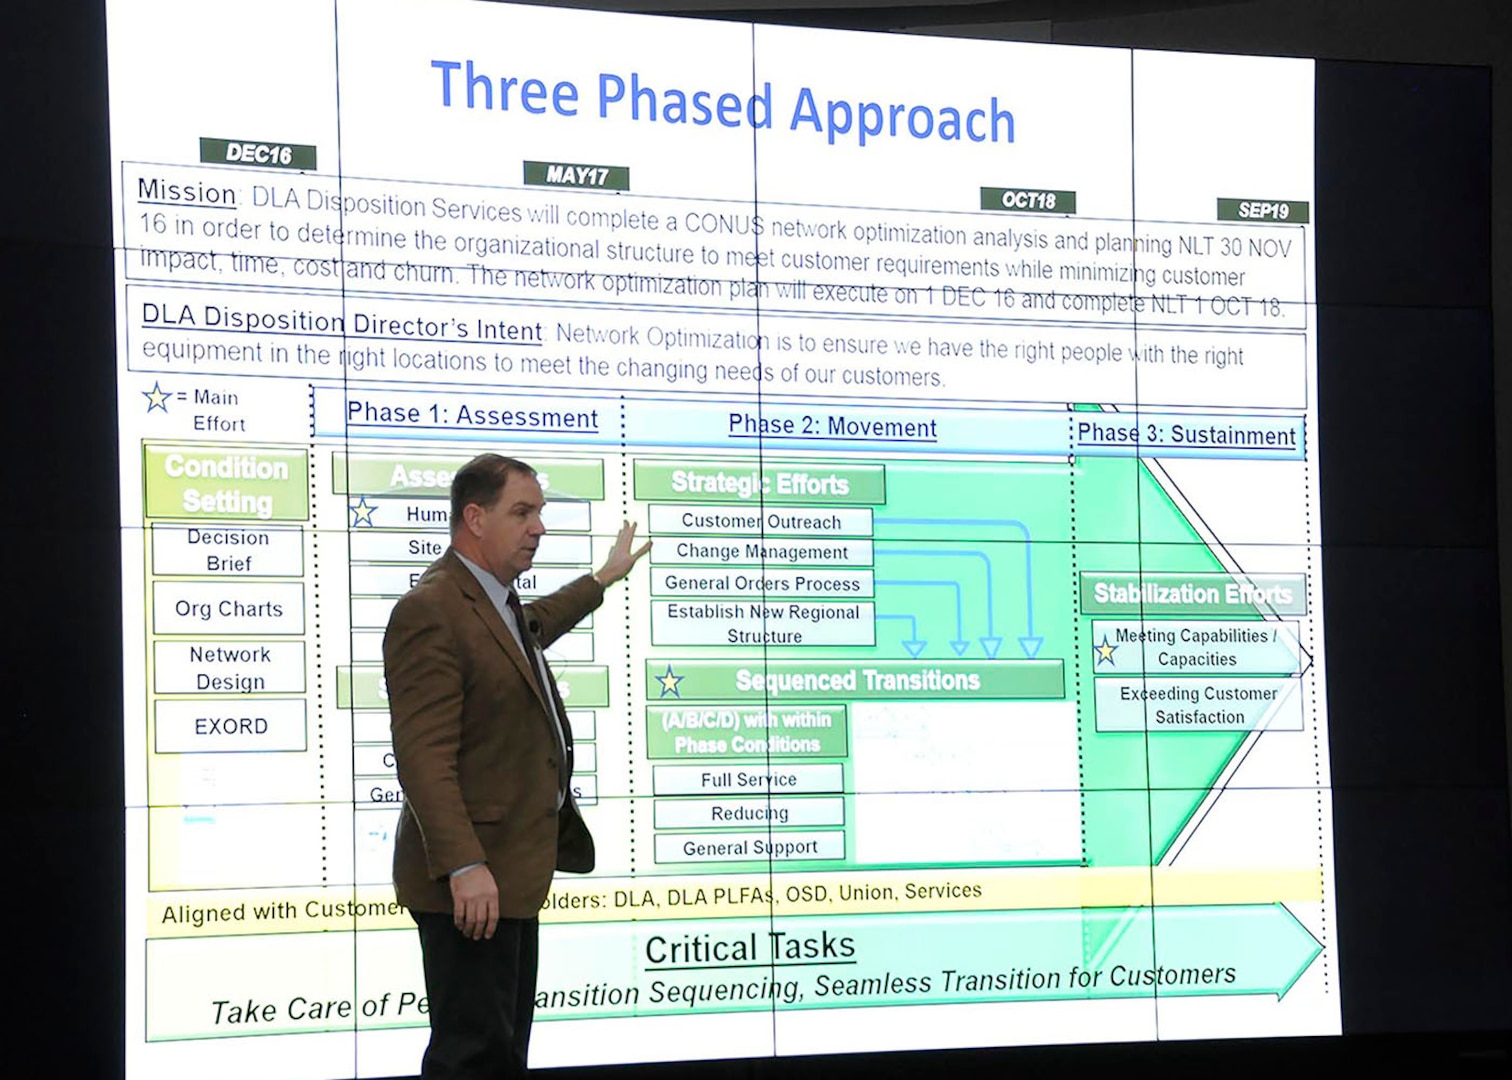 Mike Cannon, DLA Disposition Services director, tells his workforce about the three phases involved with Network Optimization  before travelling to Pentagon to brief senior service leaders. DLA photo by Jace Armstrong